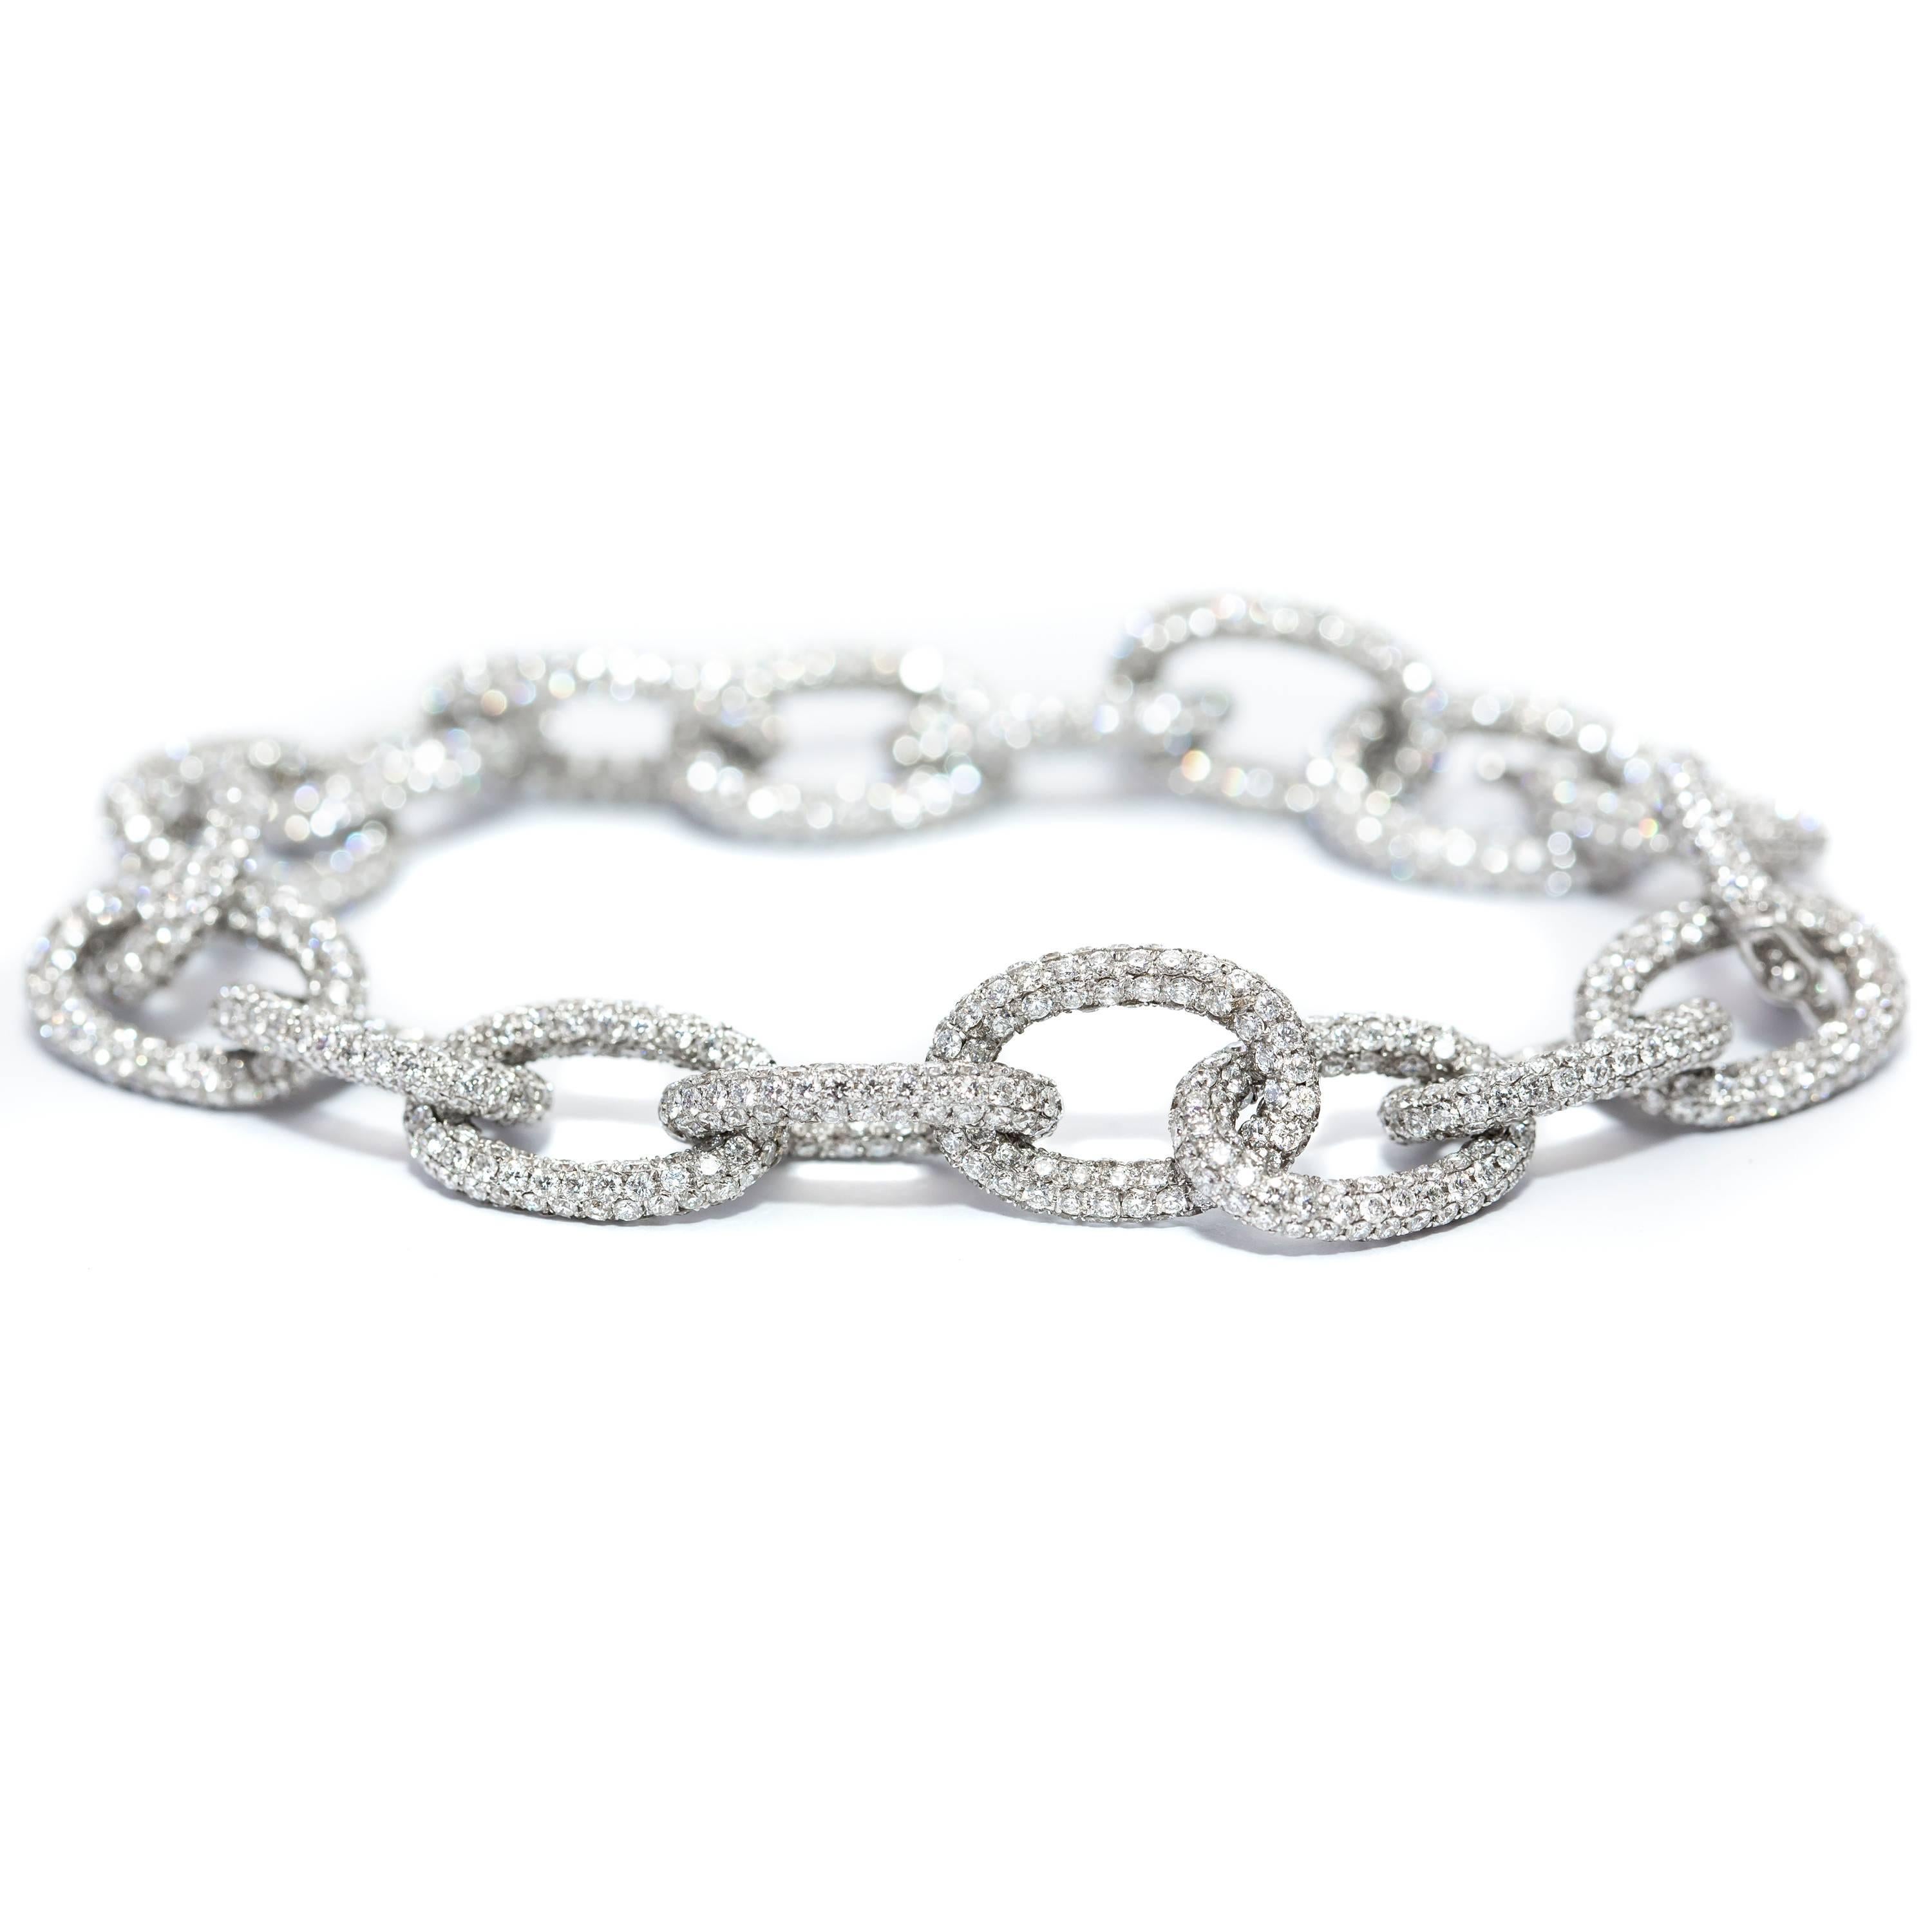 This Beautiful 18.00 Carat Round Diamond white Color G Clarity VS1 Pave Set Diamond chain bracelet set in 18 Karat White Gold. A statement piece that sparkles and stands out like none other. British Hallmarked. 